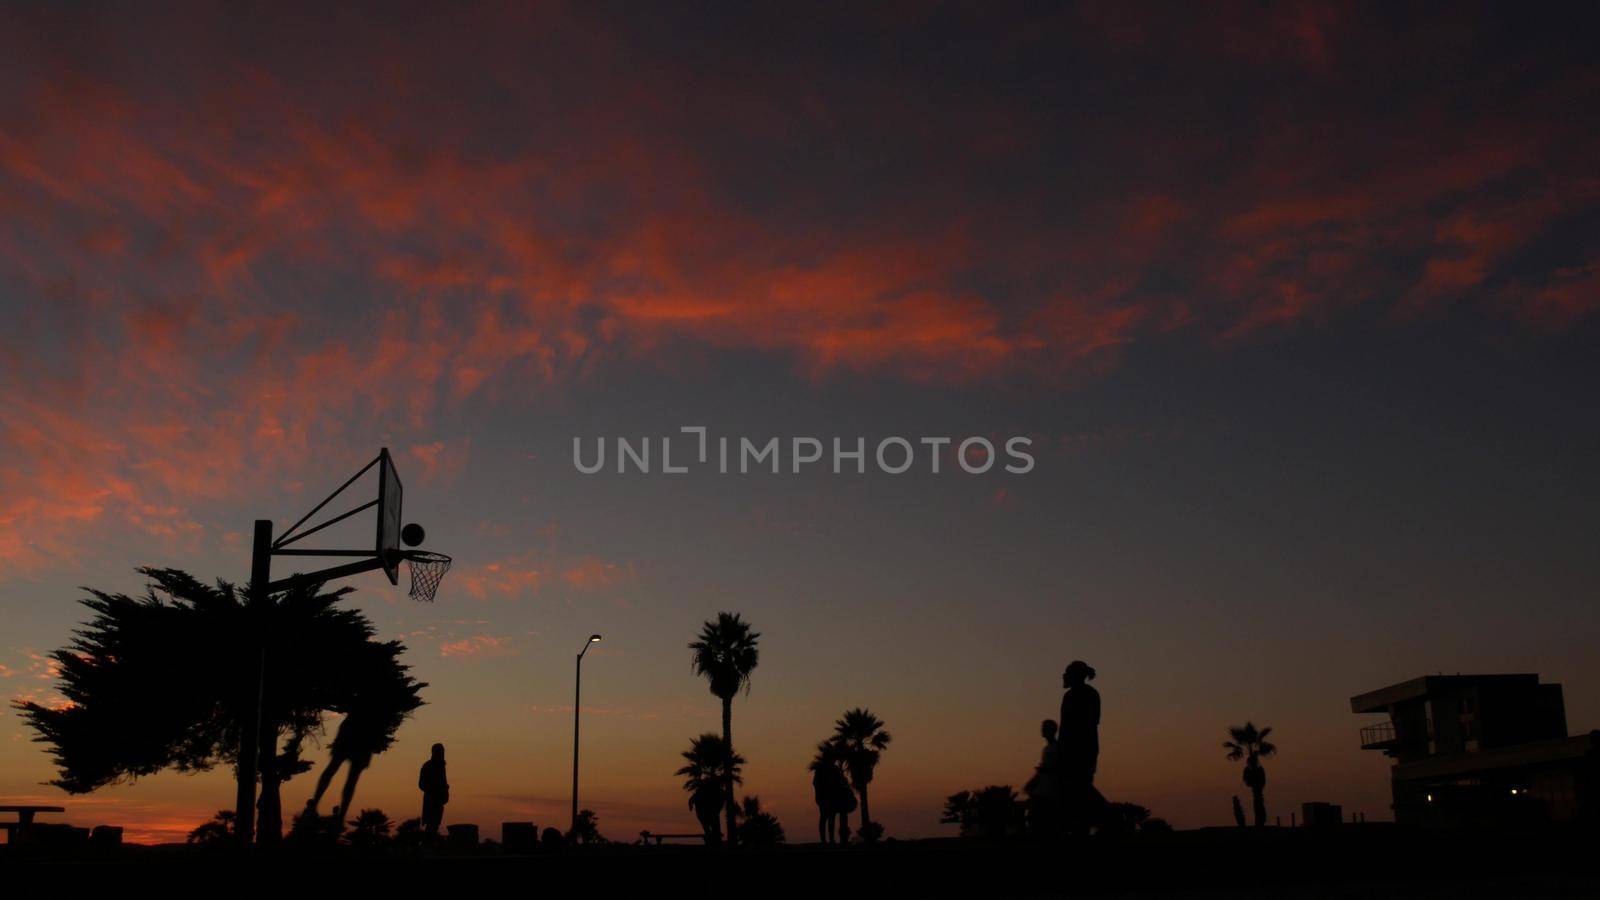 People playing basket ball game, silhouettes of players on basketball court outdoor, sunset ocean beach, California coast, Mission beach, USA. Black hoop, net and backboard on streetball sport field.